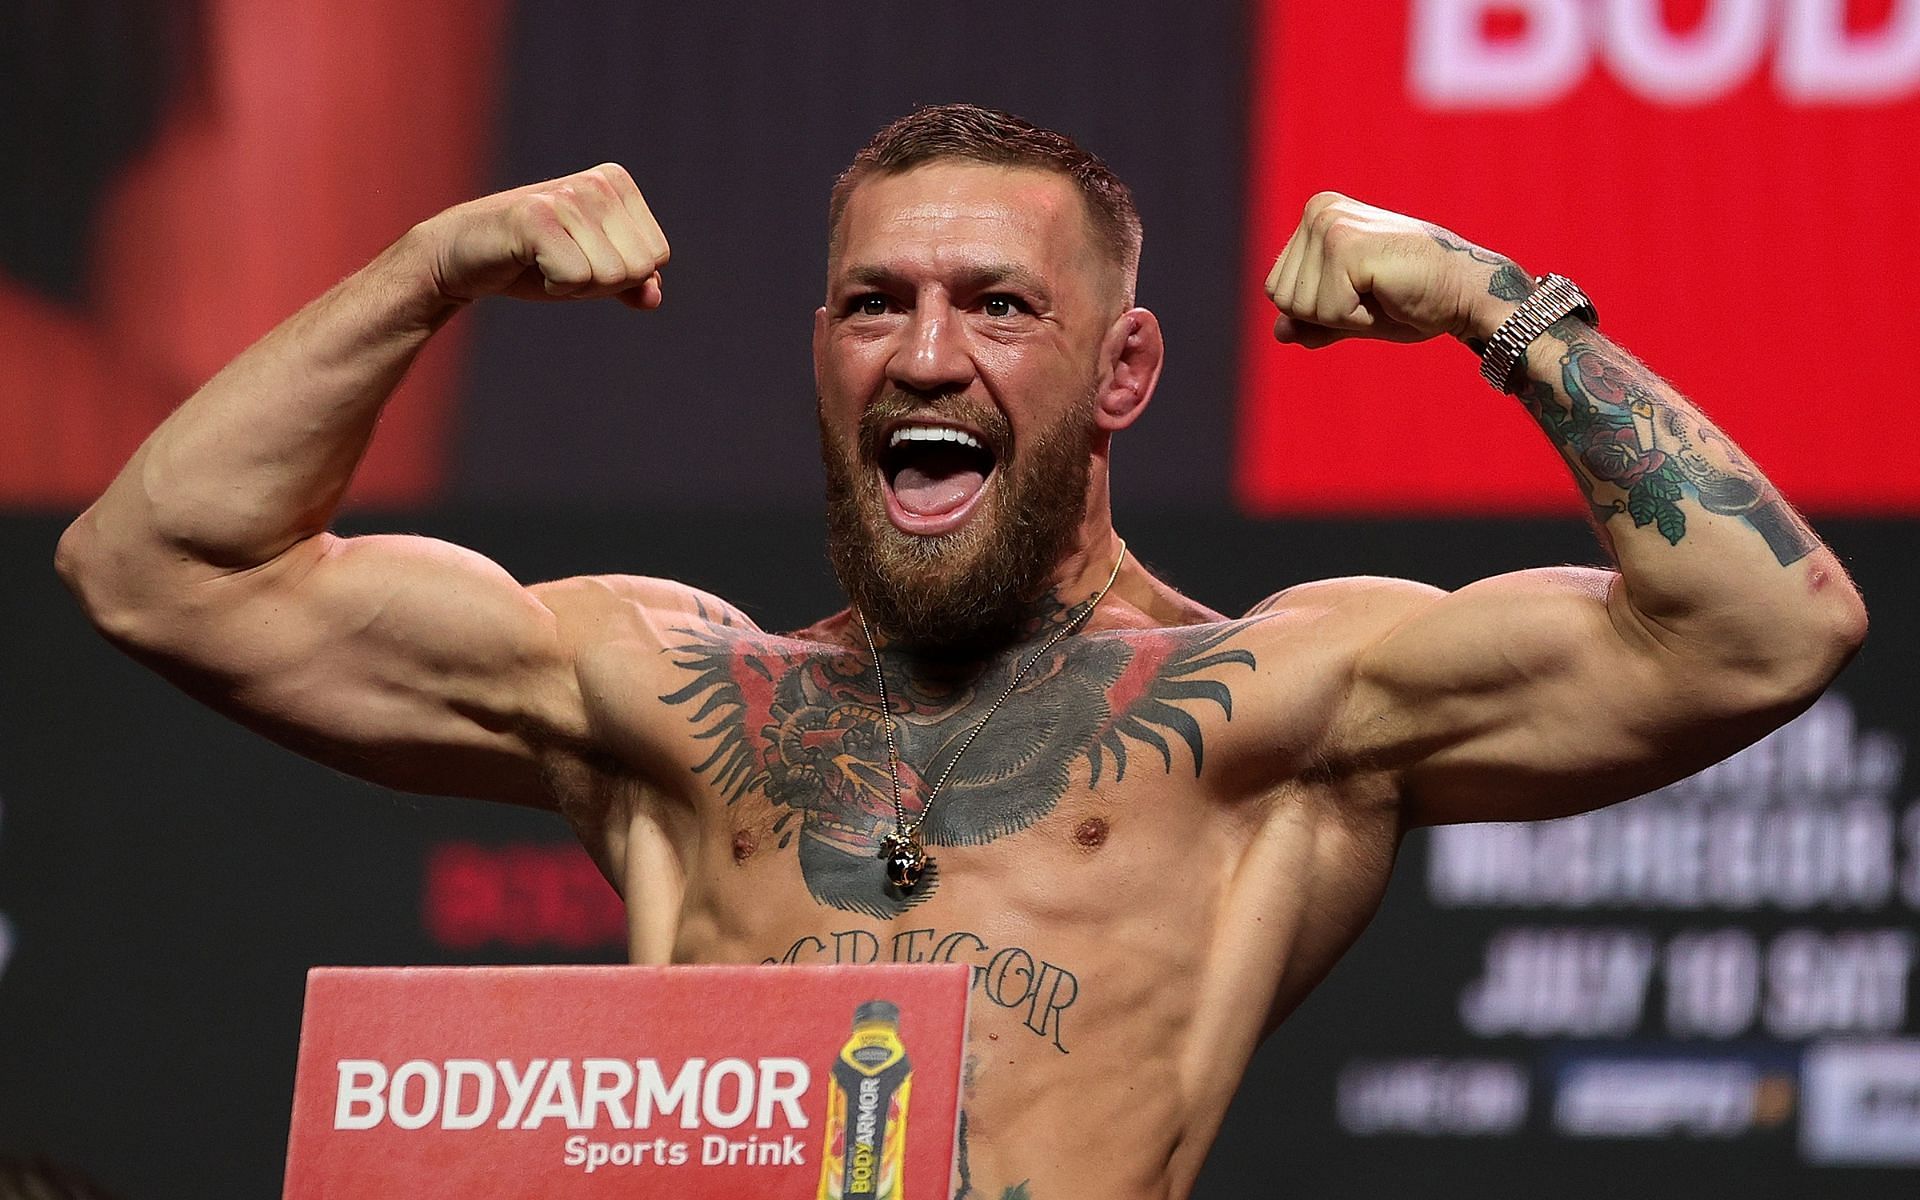 Conor McGregor poses for the media during the ceremonial weigh-in of UFC 264 ahead of his main event against Dustin Poirier in 2021